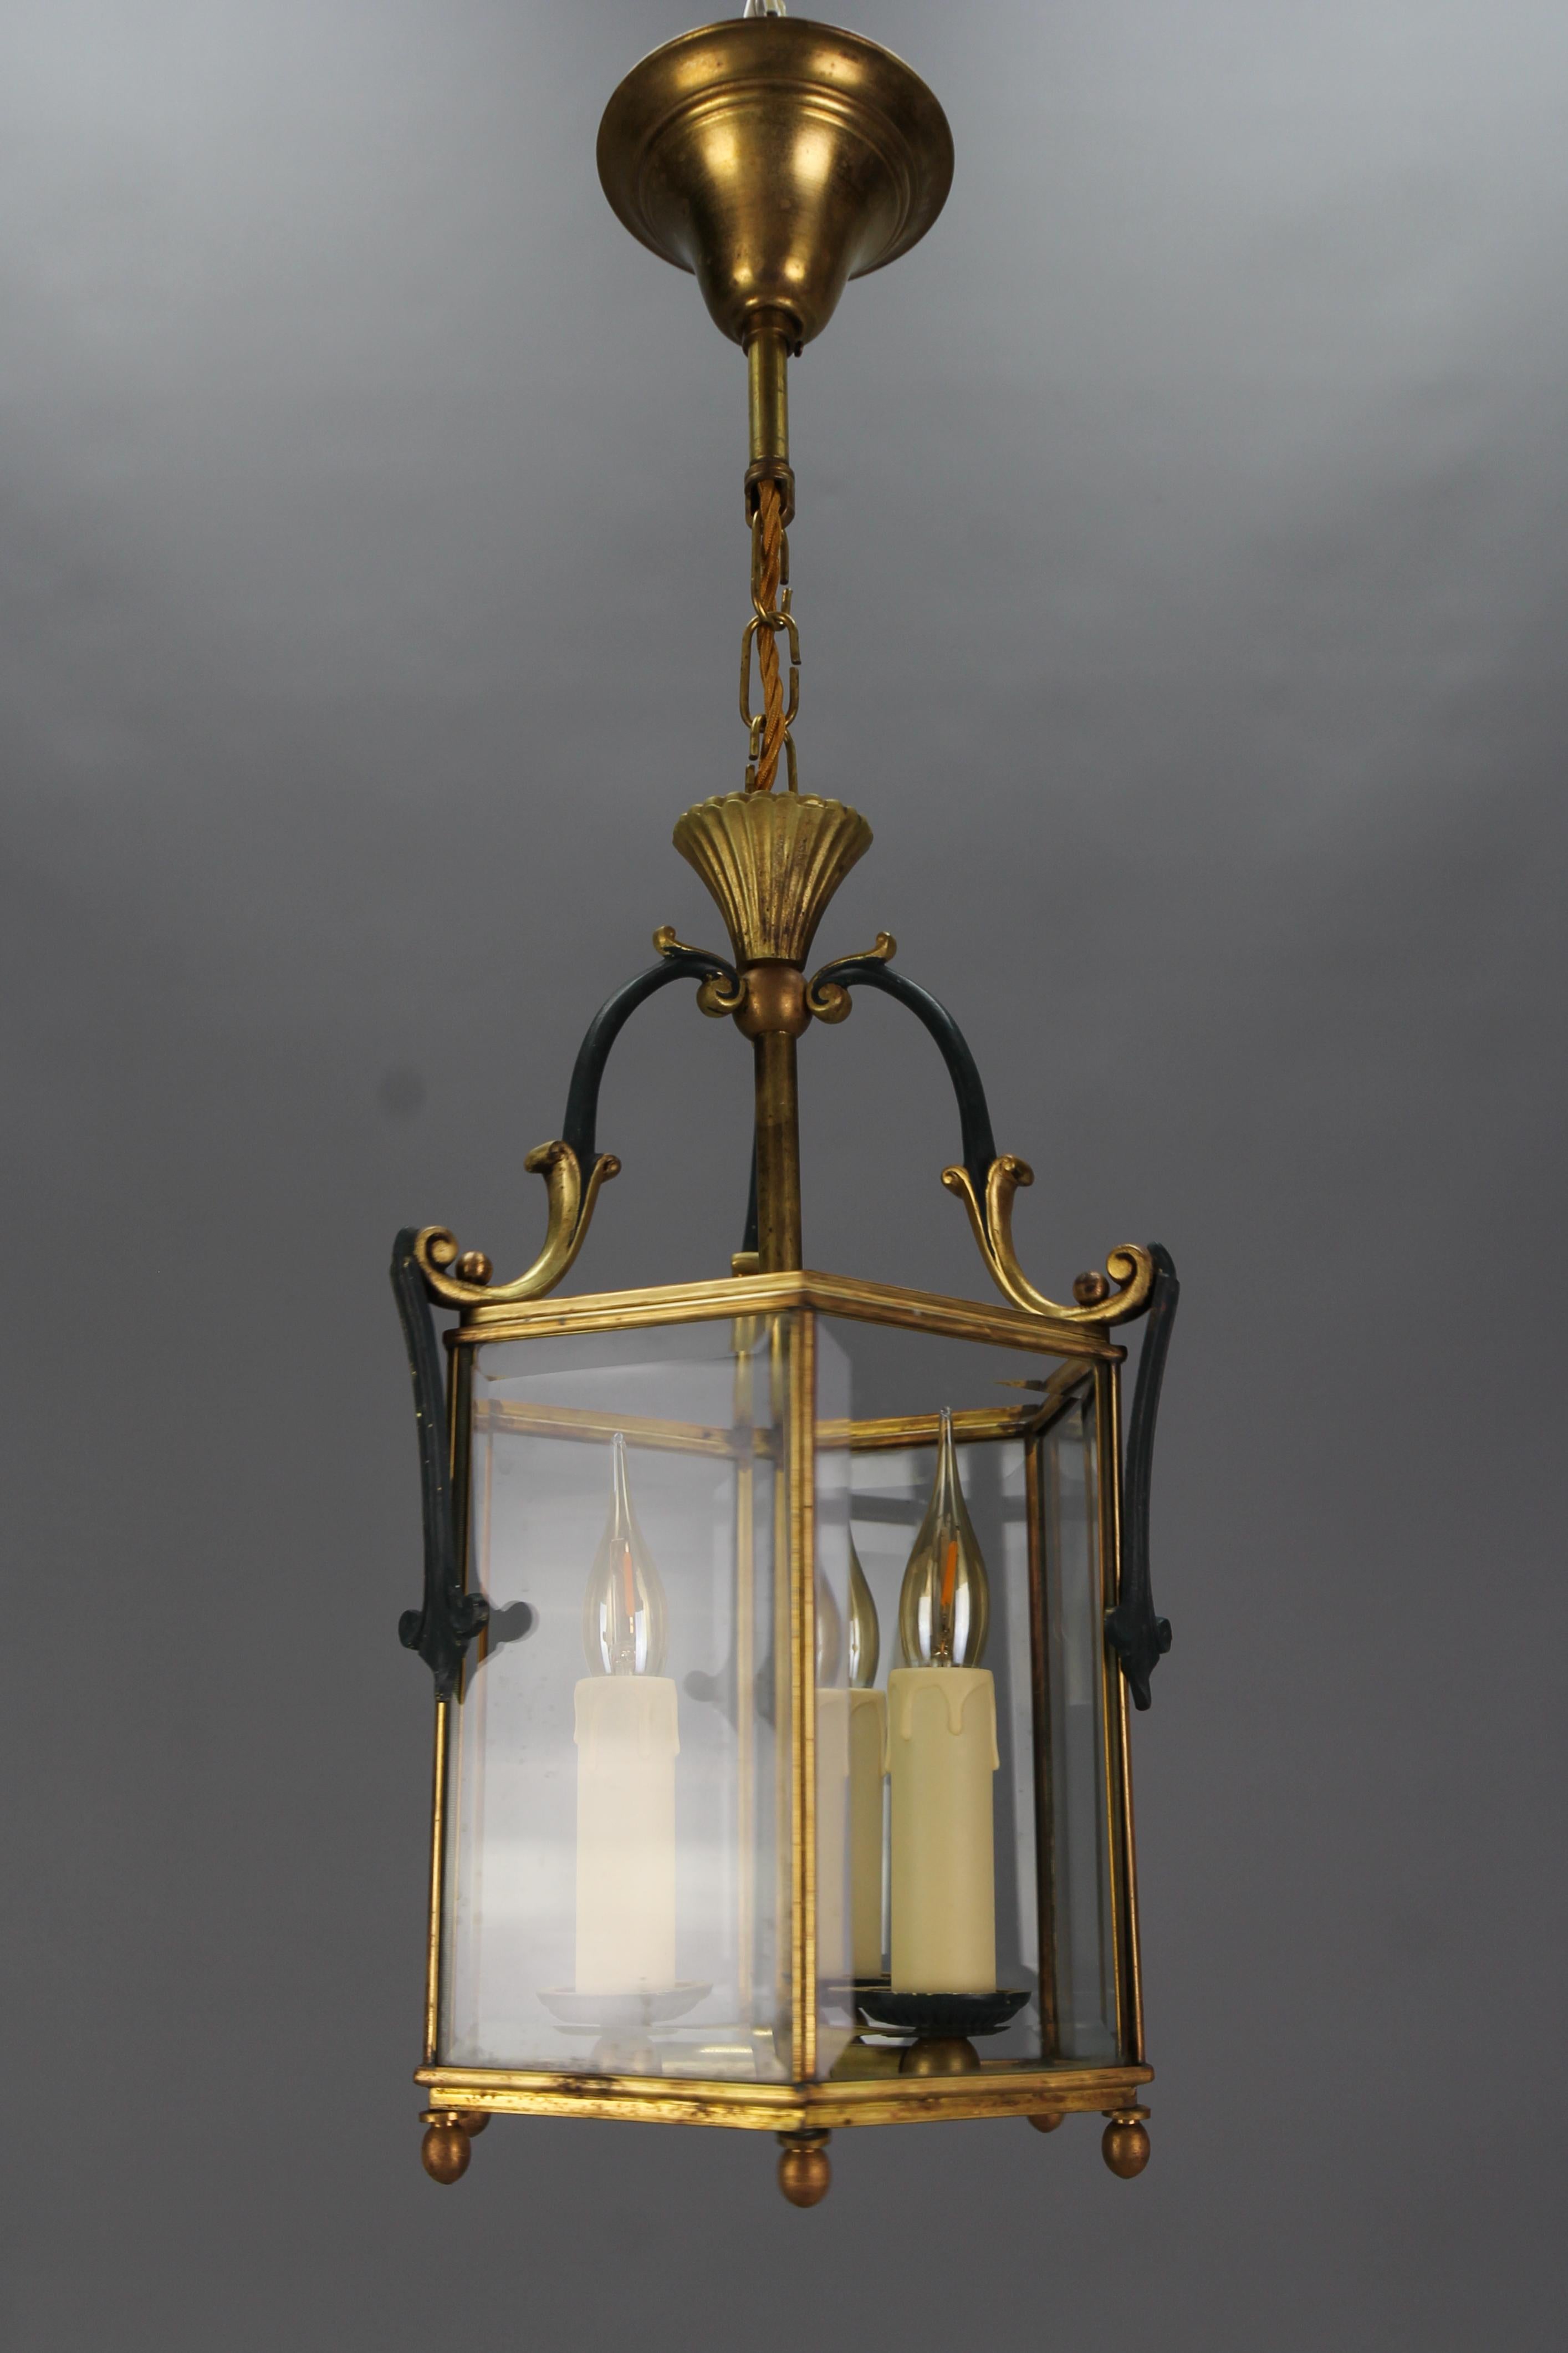 French brass and beveled clear glass hexagonal hanging lantern from circa the 1920s.
This adorable three-light antique pendant lantern features an elegant hexagonal brass frame with dark green painted details and six slightly beveled clear glass